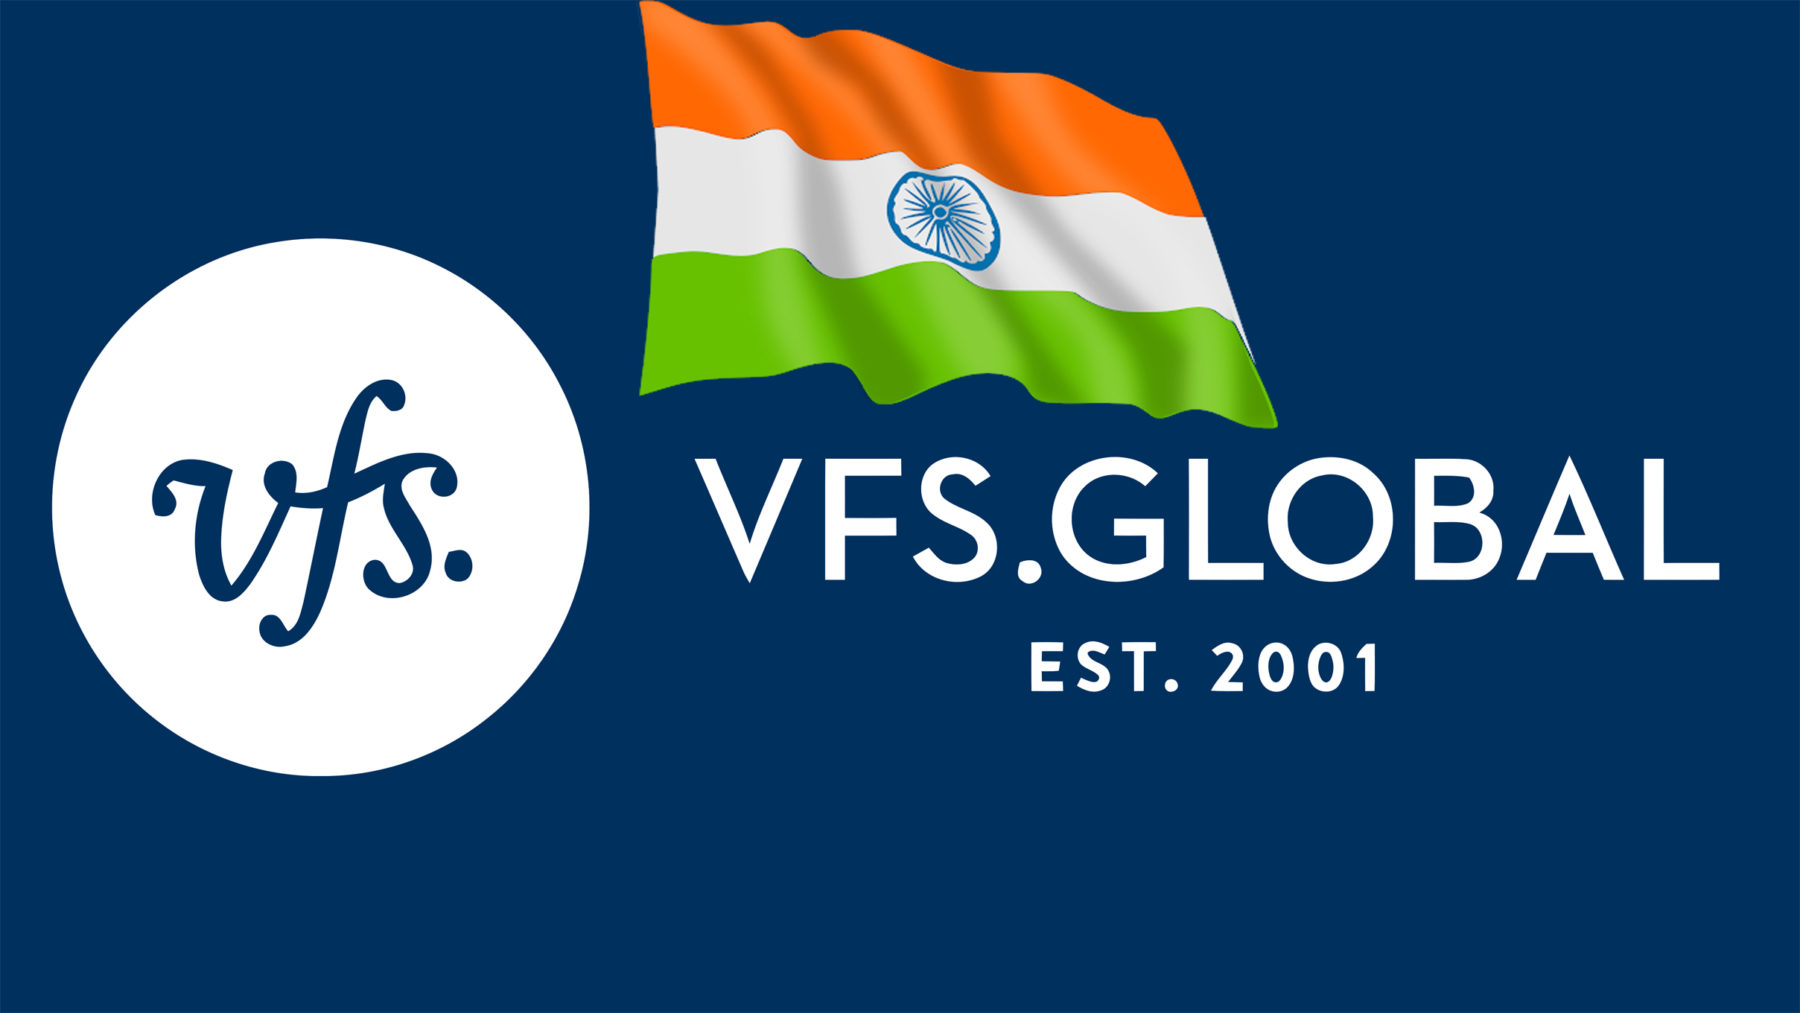 Migrate to Poland. VFS page logo and flag of the India. VFS is The largest website dealing with issues related to passports, visas and services for citizens of different countries.